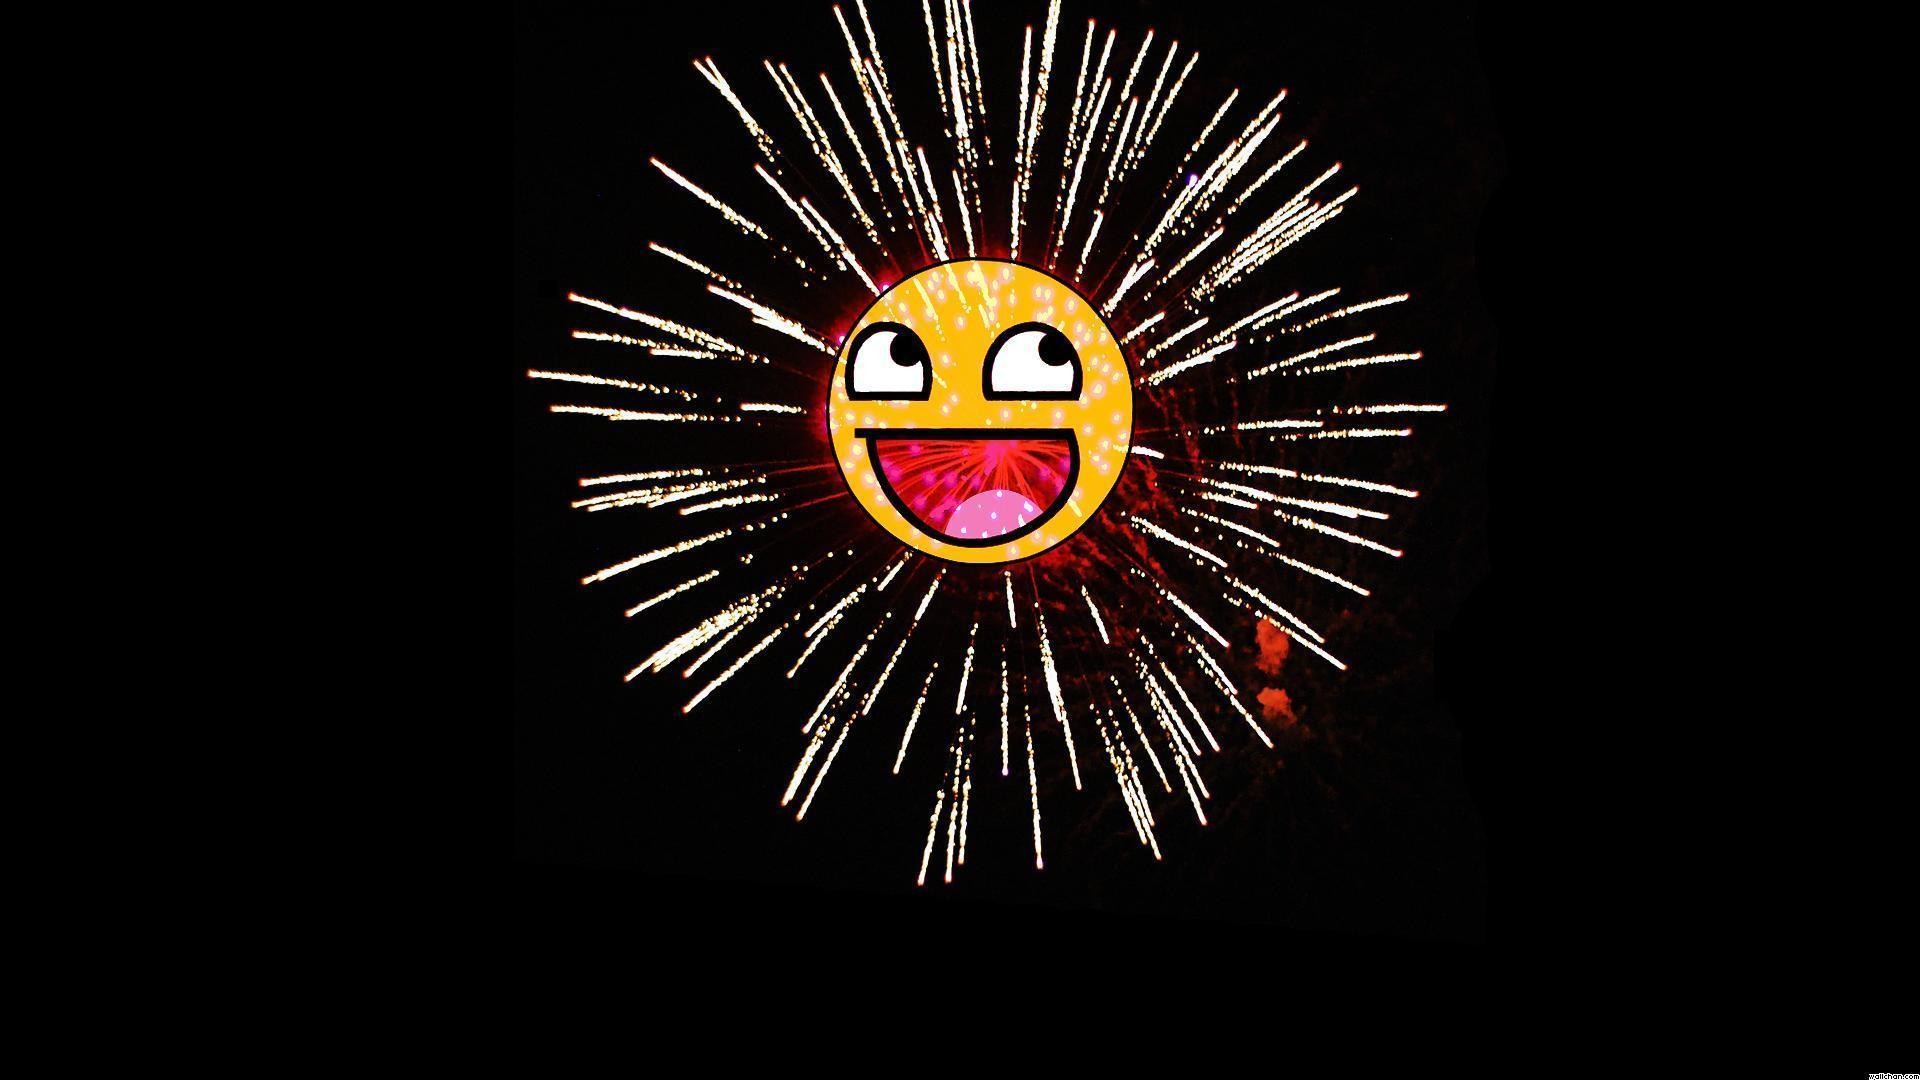 1920x1080 Awesome Face Fireworks Fire Cracker,Fireworks hd Wallpaper For .